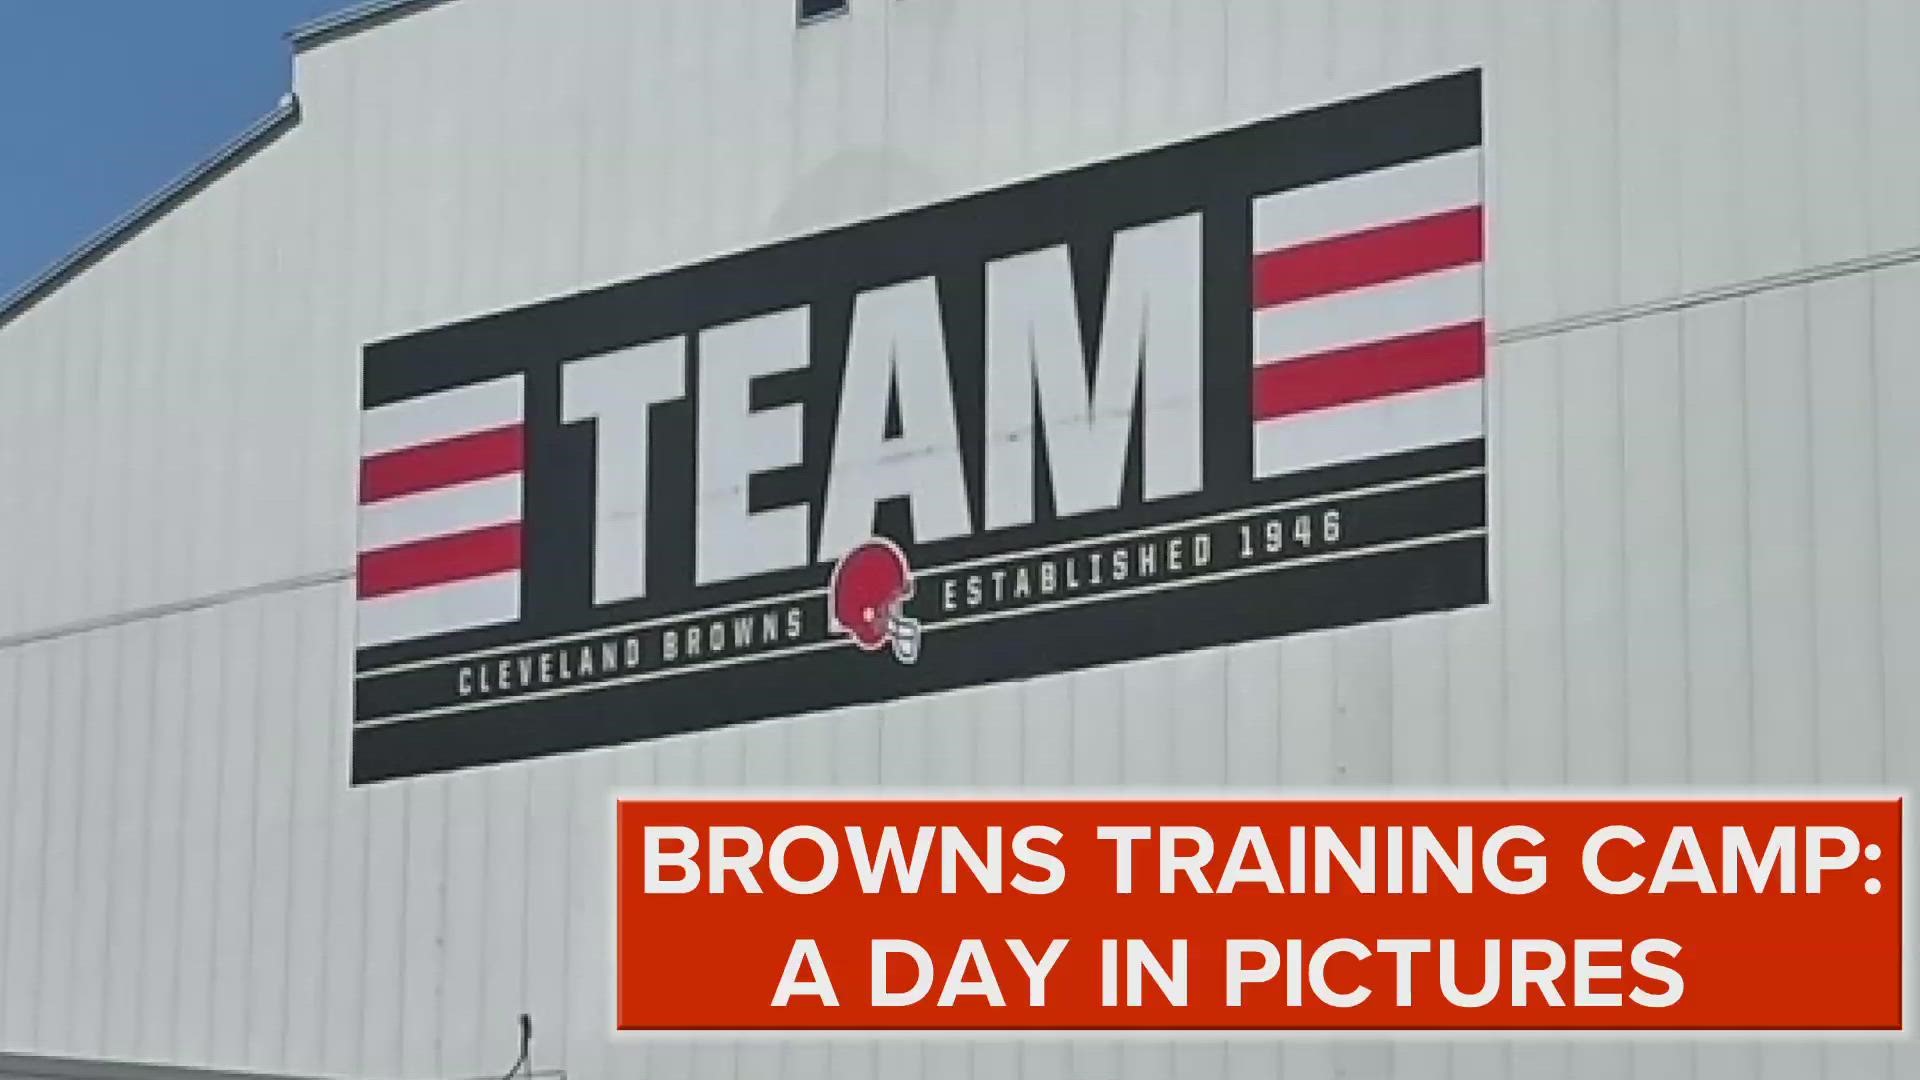 Check out the pics from day 7 of Browns' training camp from Berea.